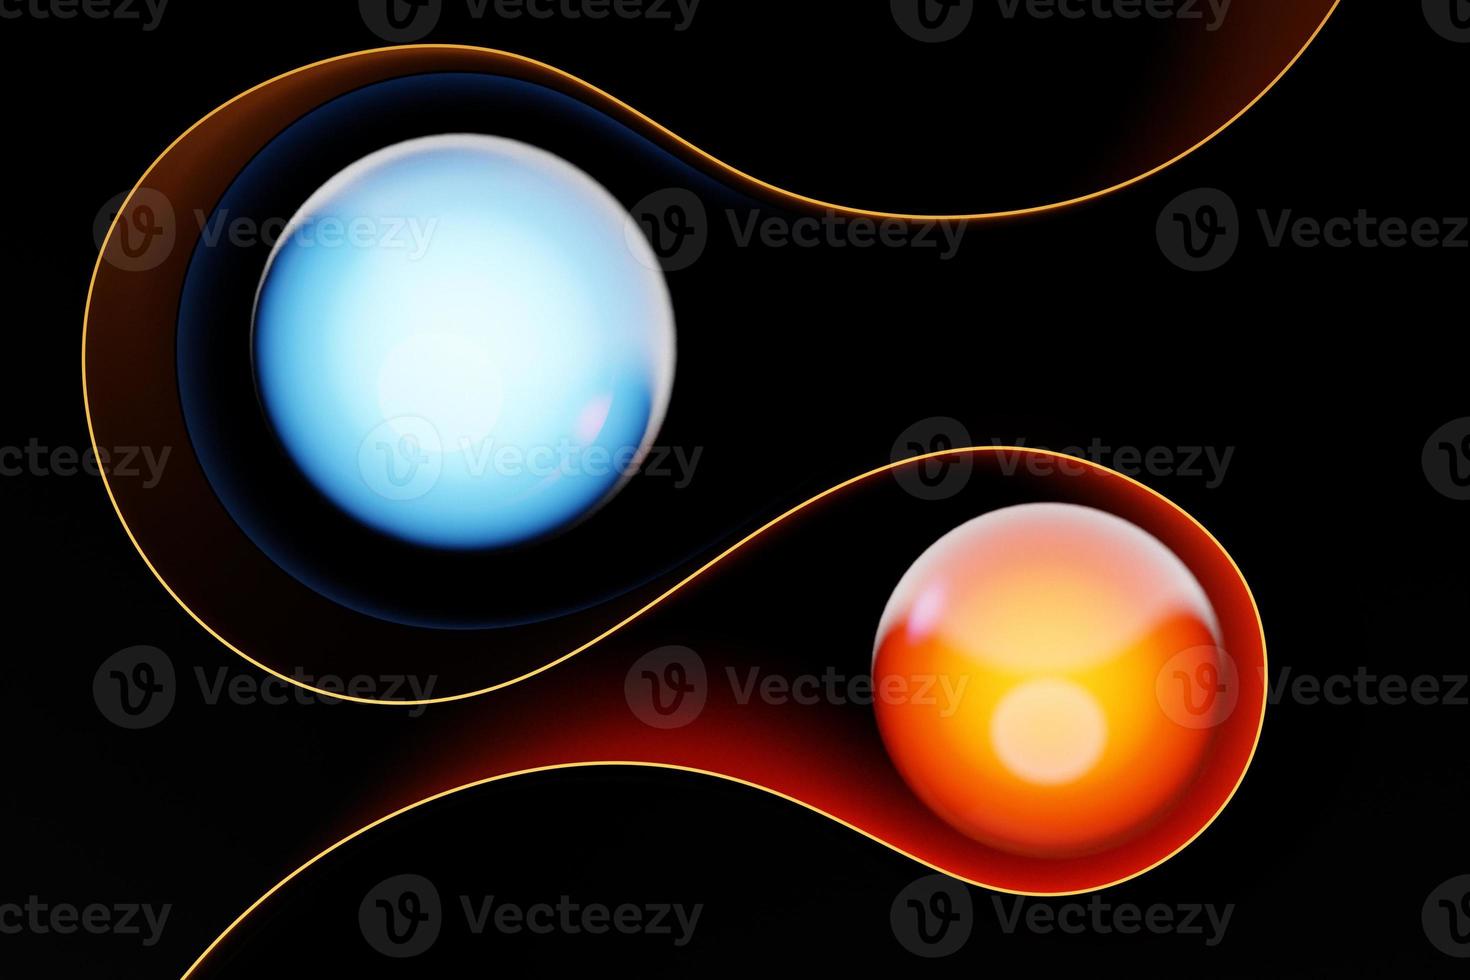 3d illustration of a geometric  yelllow wave surface with glowing colorful balls inside. Pattern of simple geometric shapes photo